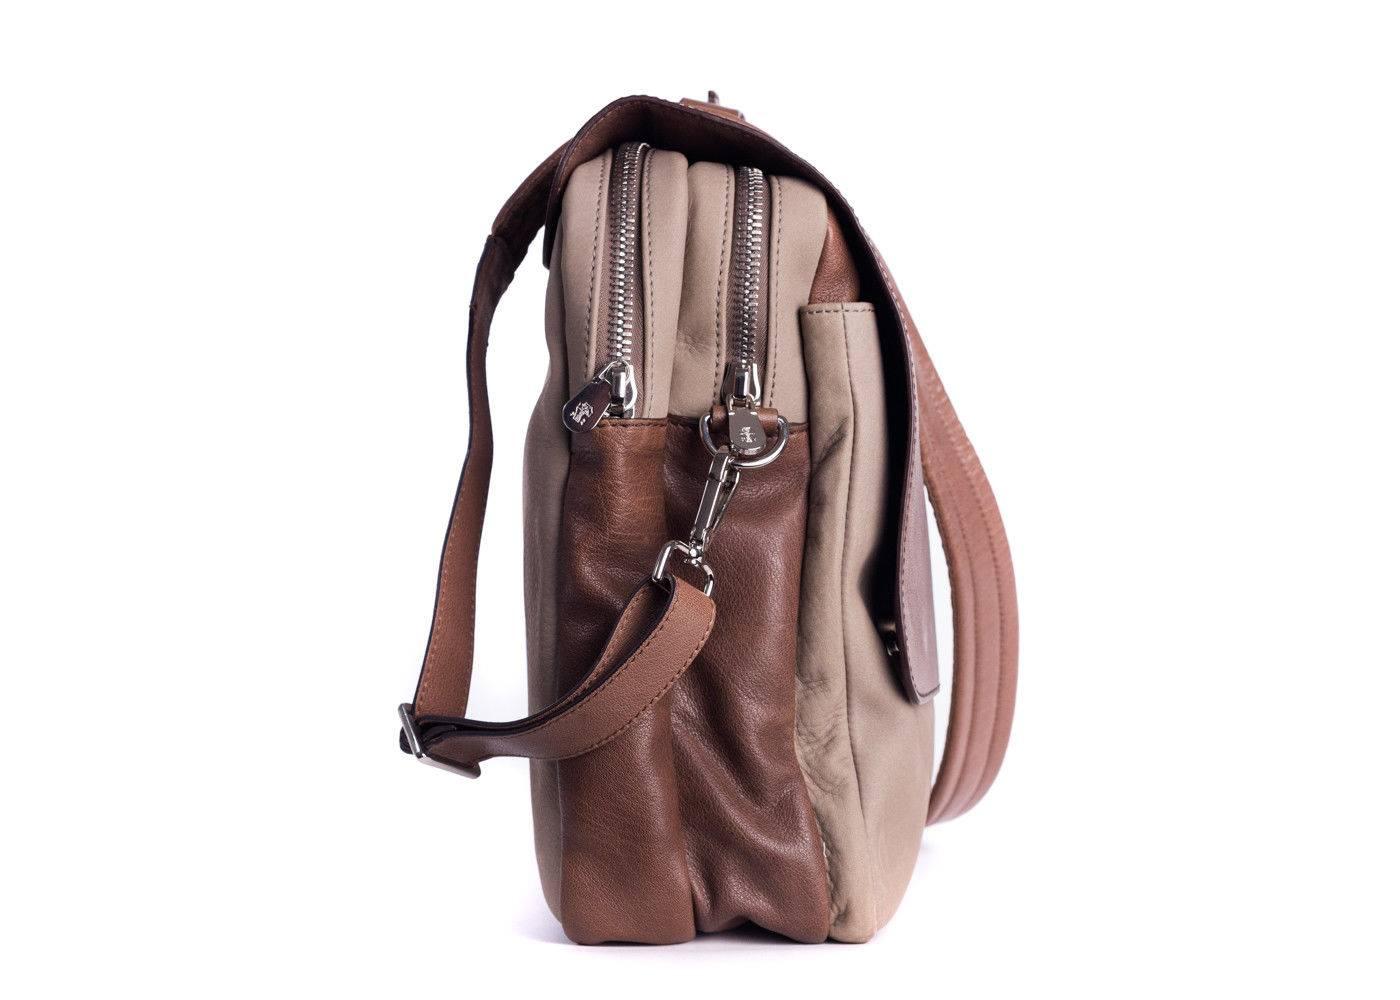 Brand New Brunello Cucinelli Messenger Bag

Dust Bag Included
Retails in Stores & Online for $2880
Dimensions: 17